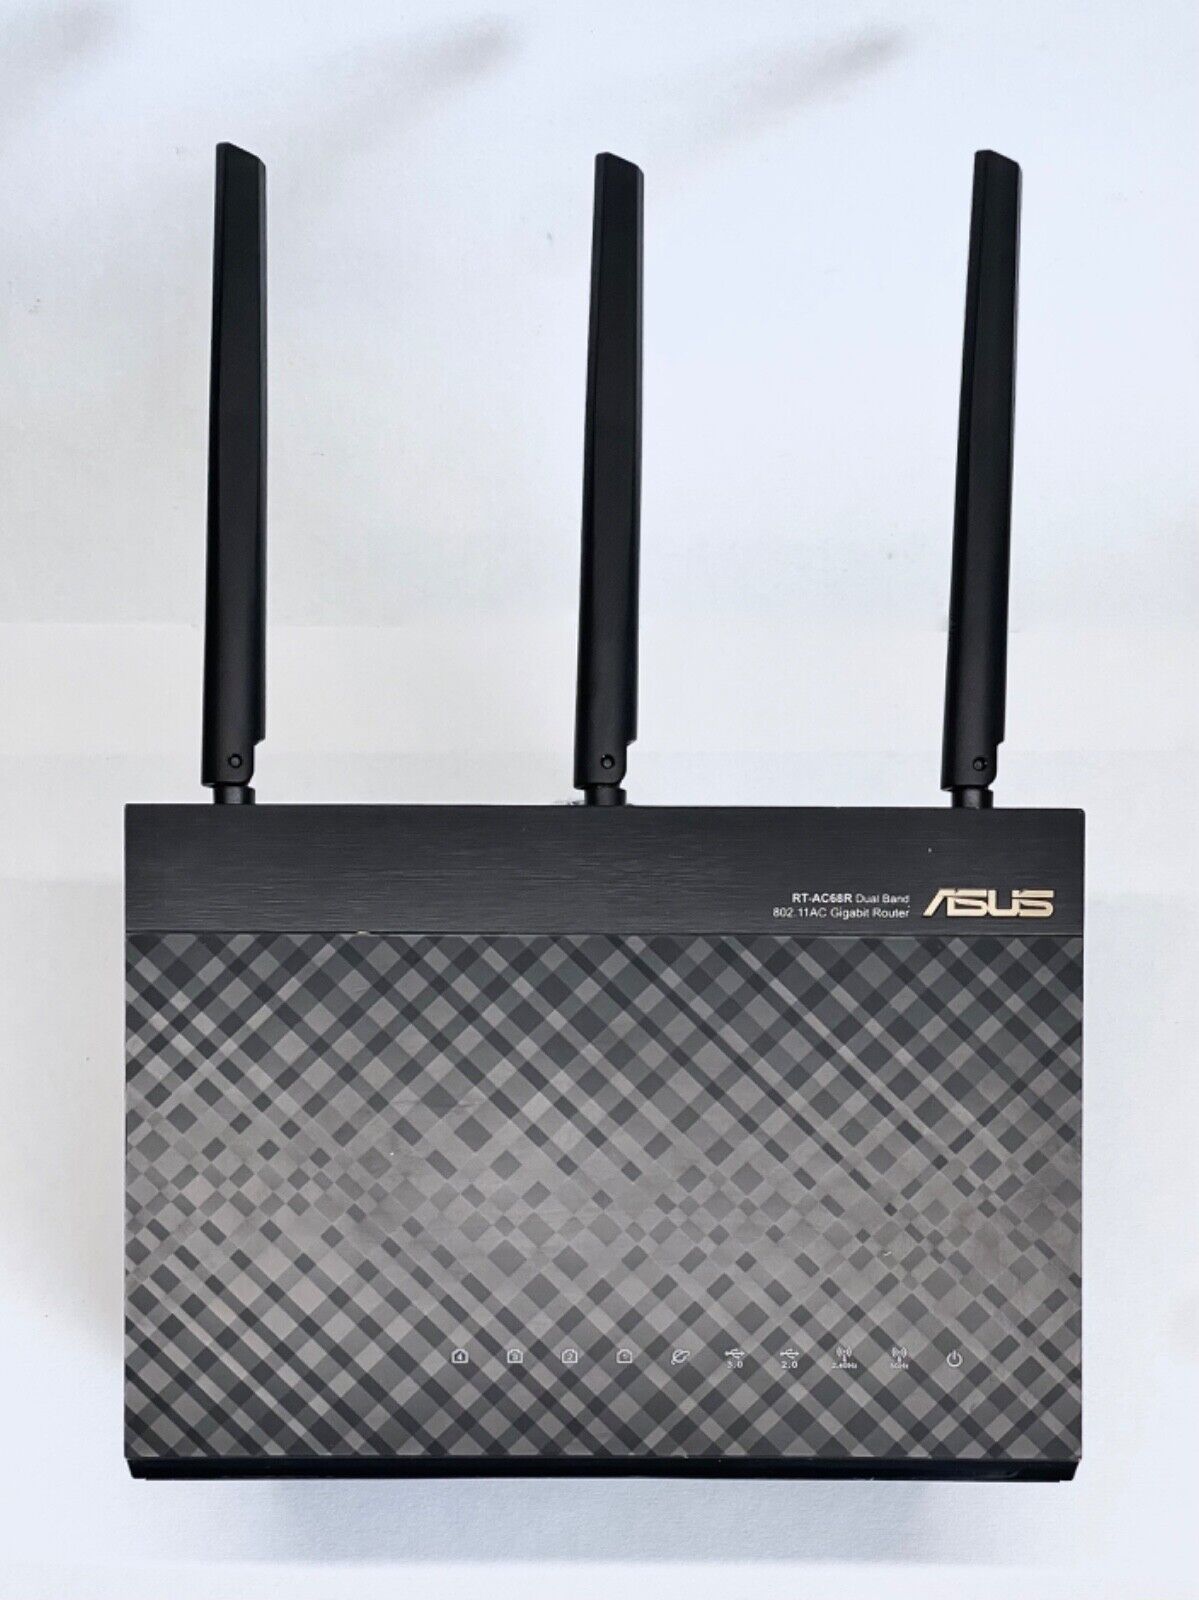 ASUS Wireless AC 1900 Dual Band Gigabit Router Model# RT-AC68R Reset & Working